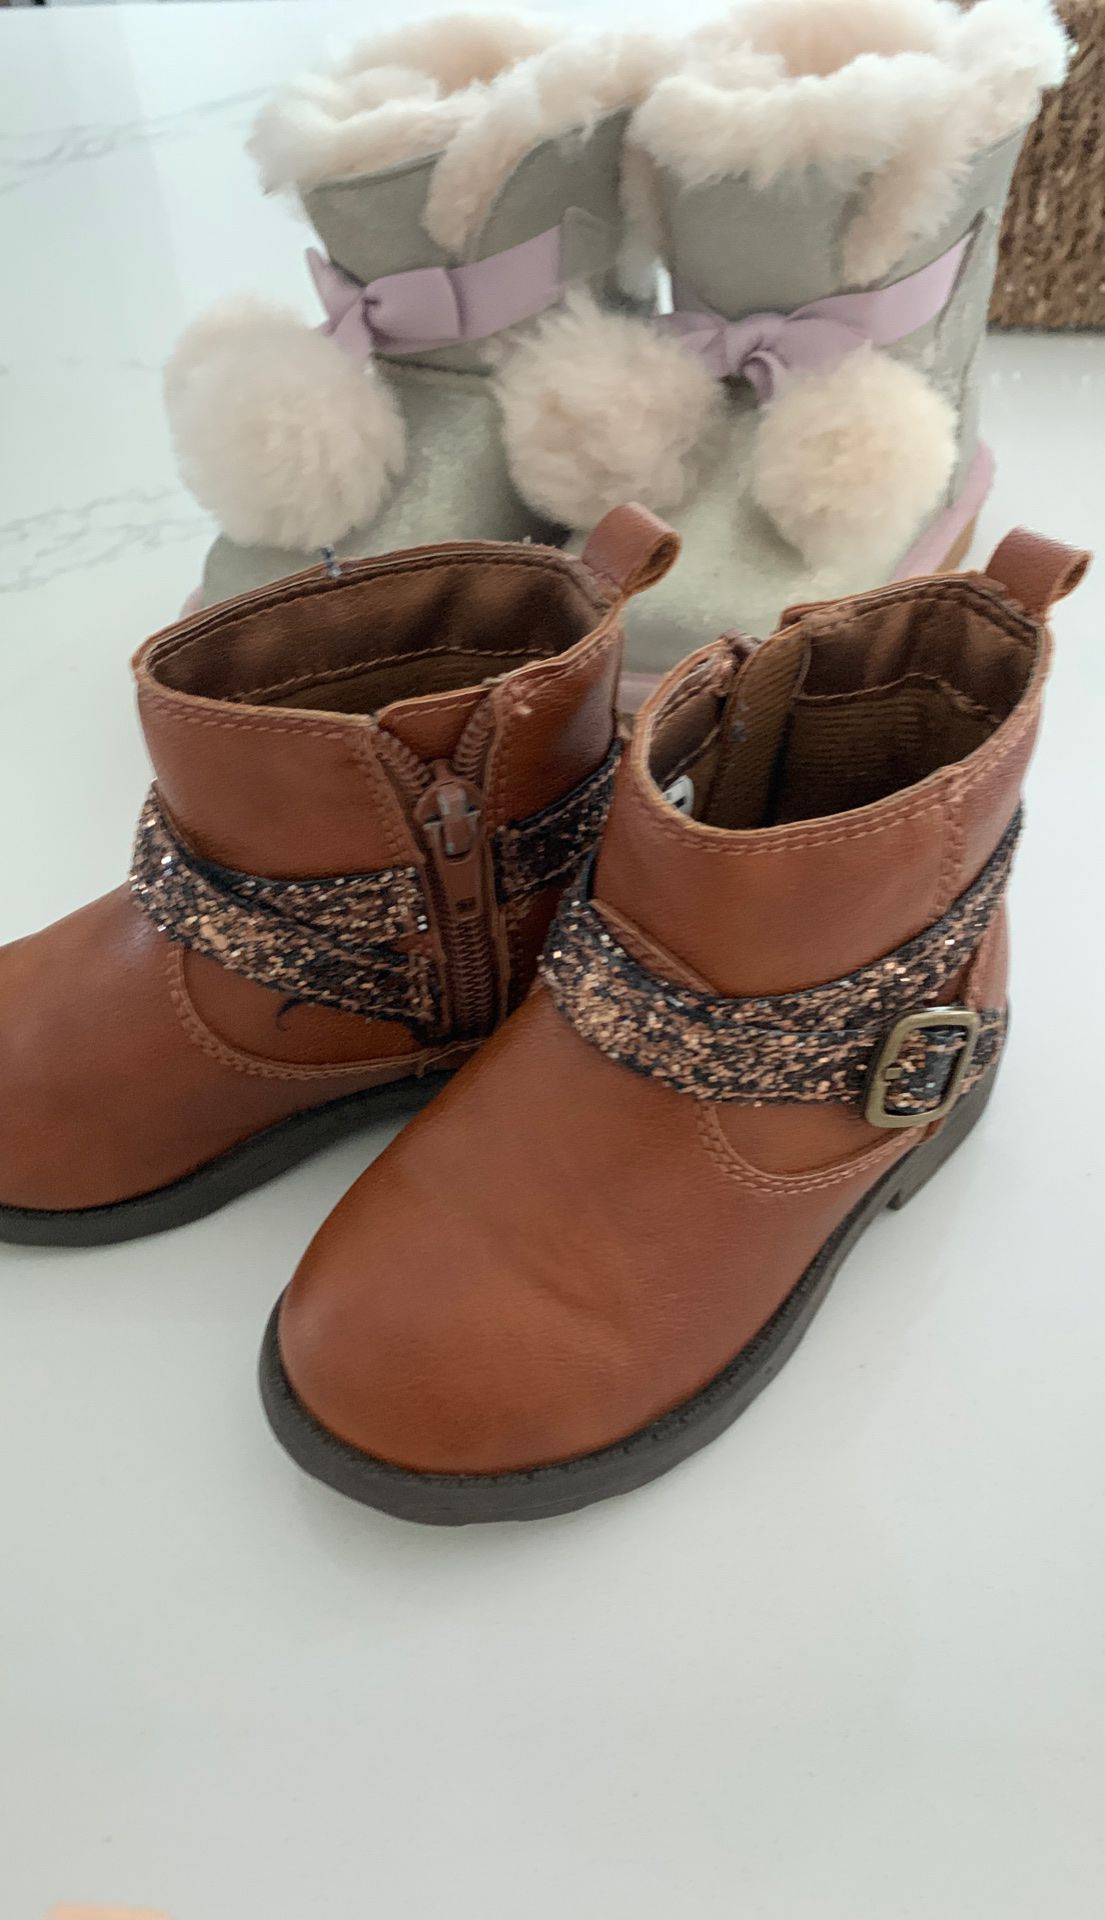 Size 6 toddler boots